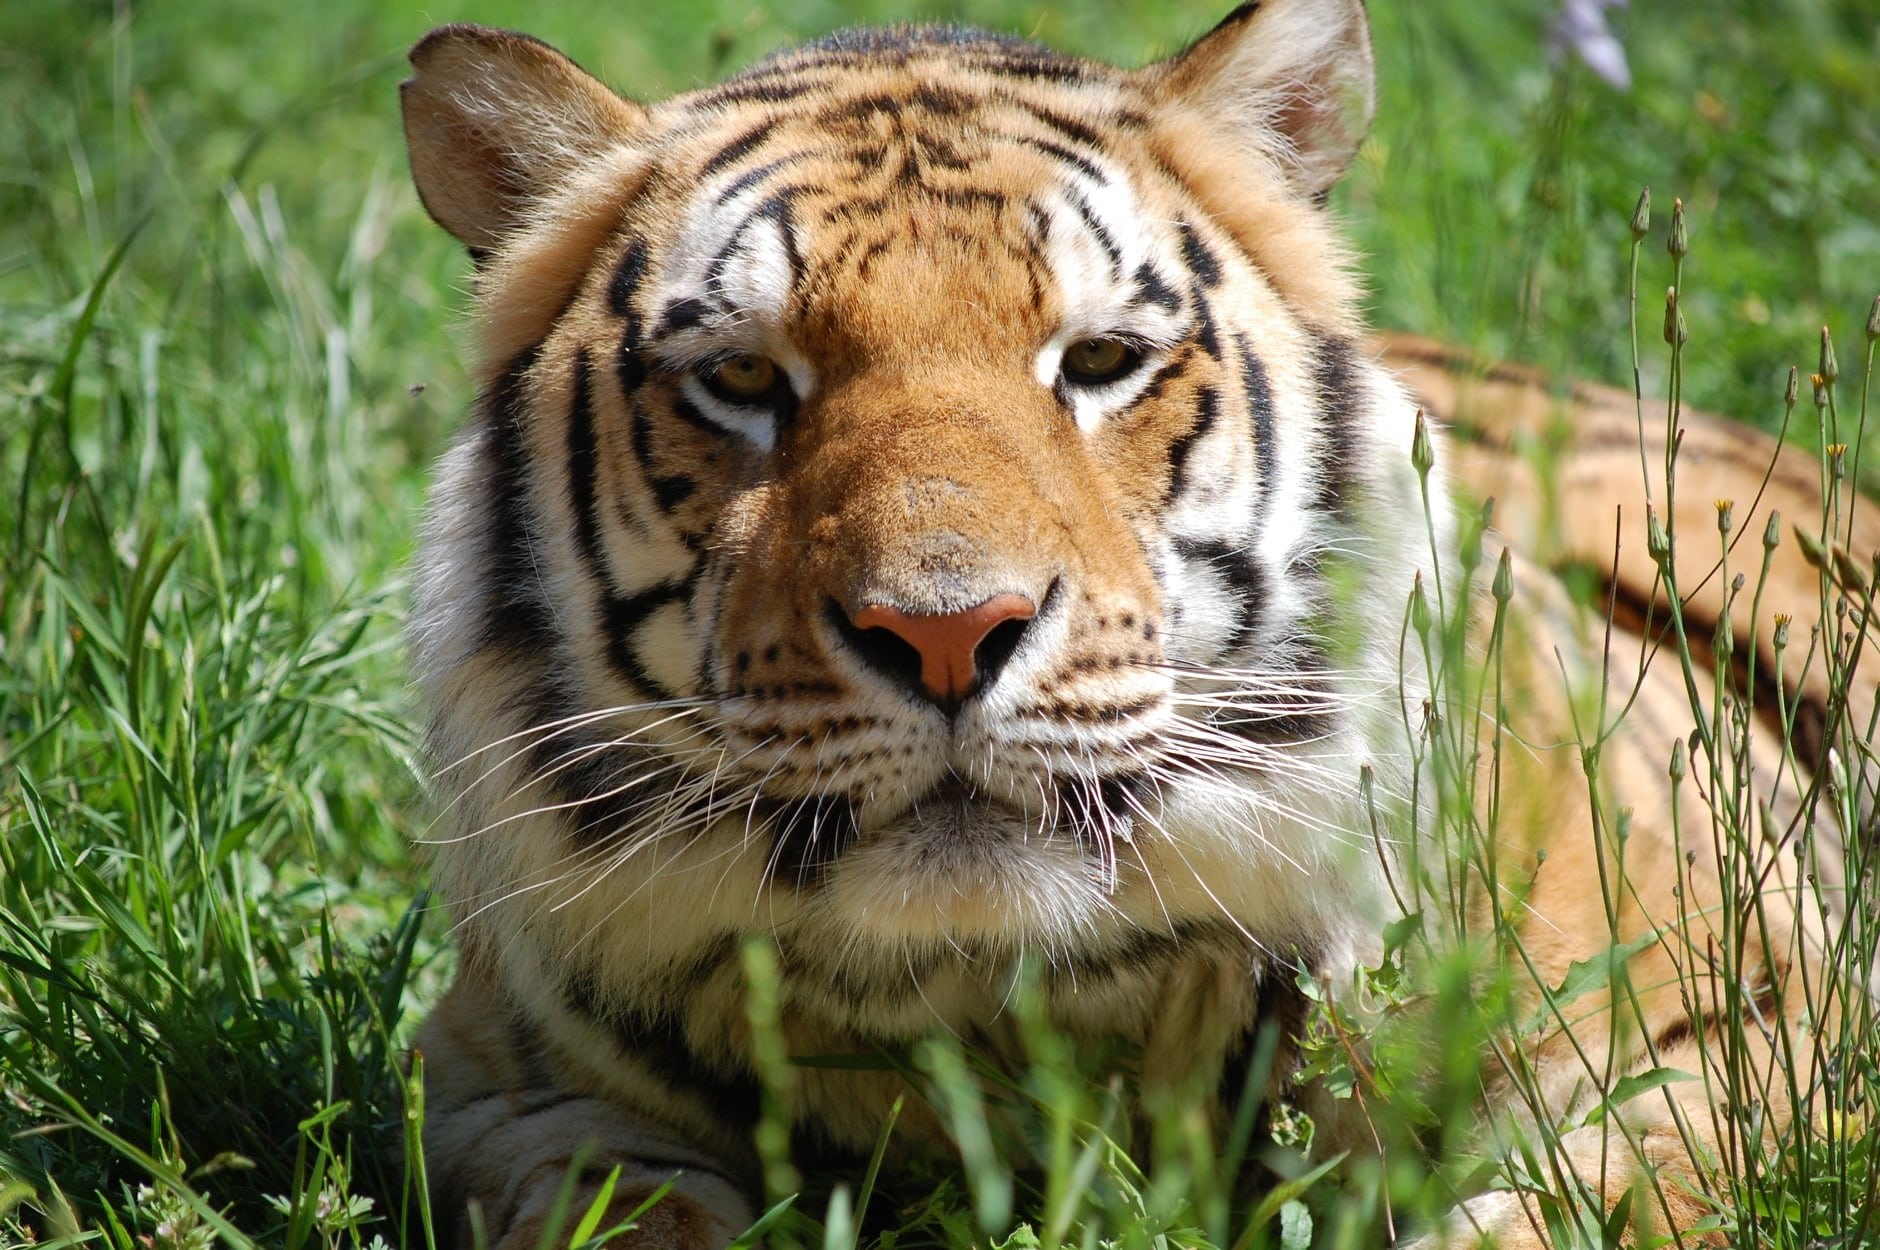 Tiger in Grass Close Up